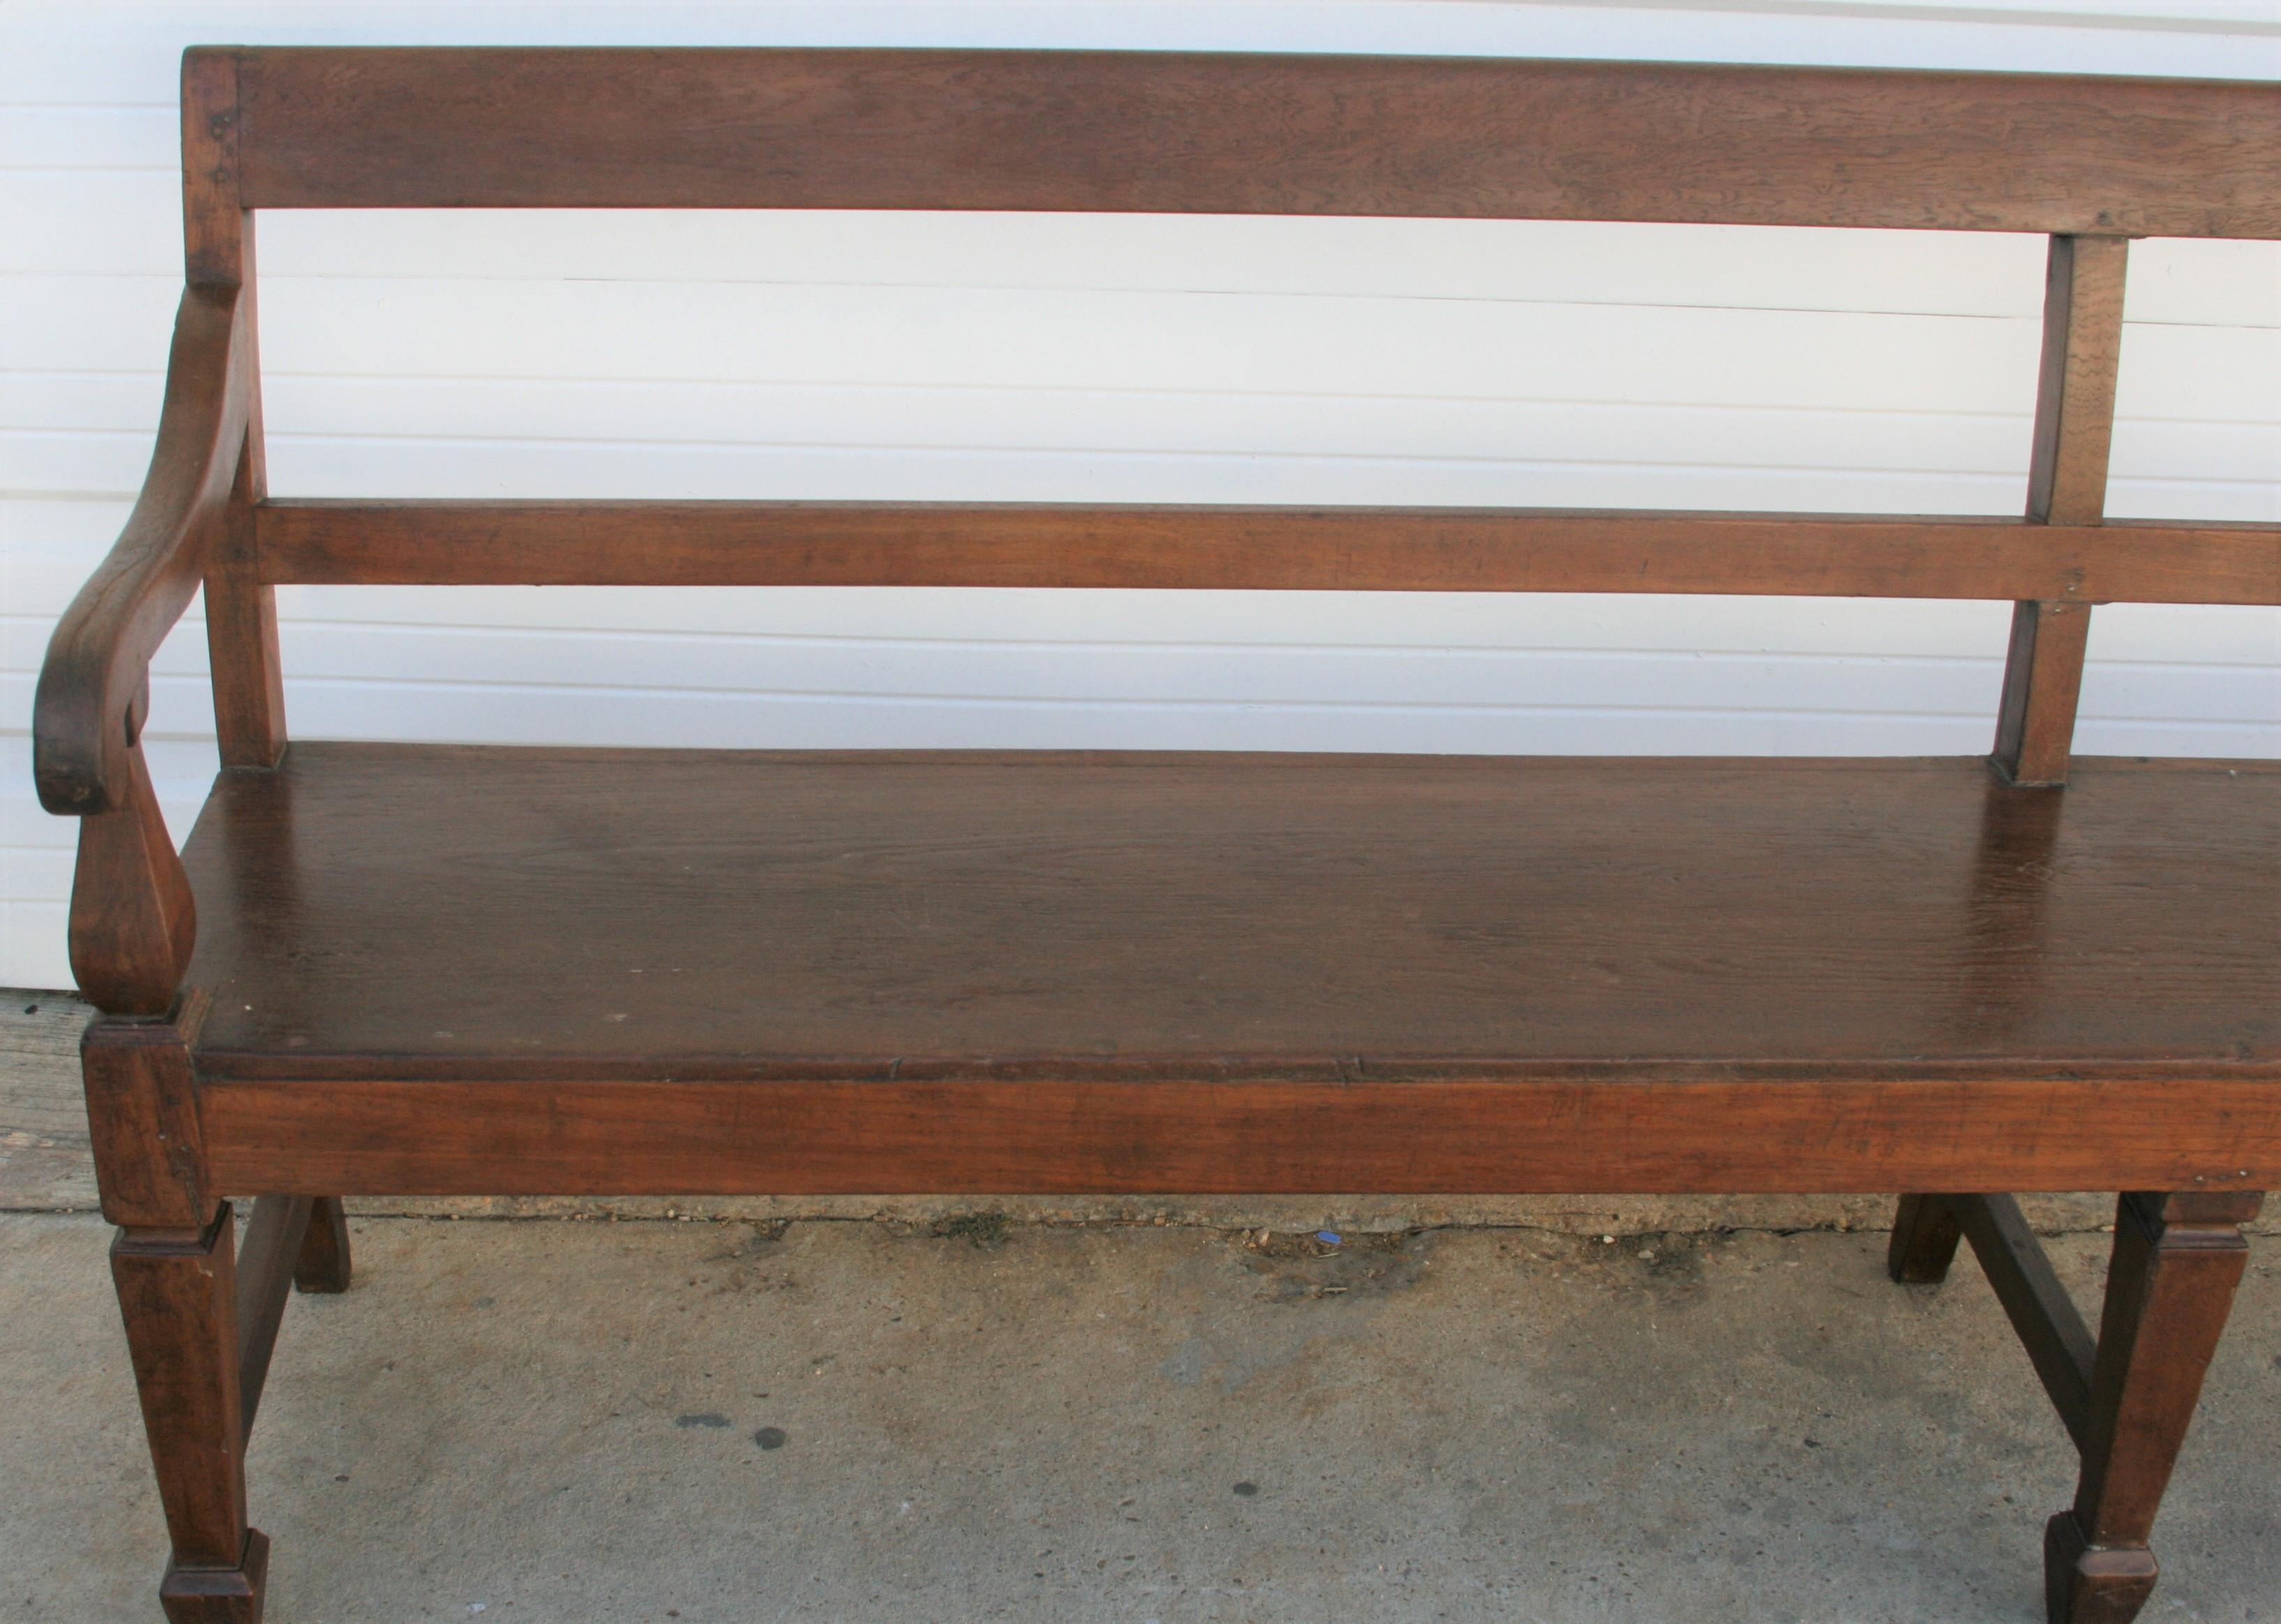 Indian Rare 1910s Solid Teak Wood Handcrafted Bench from a Company Office